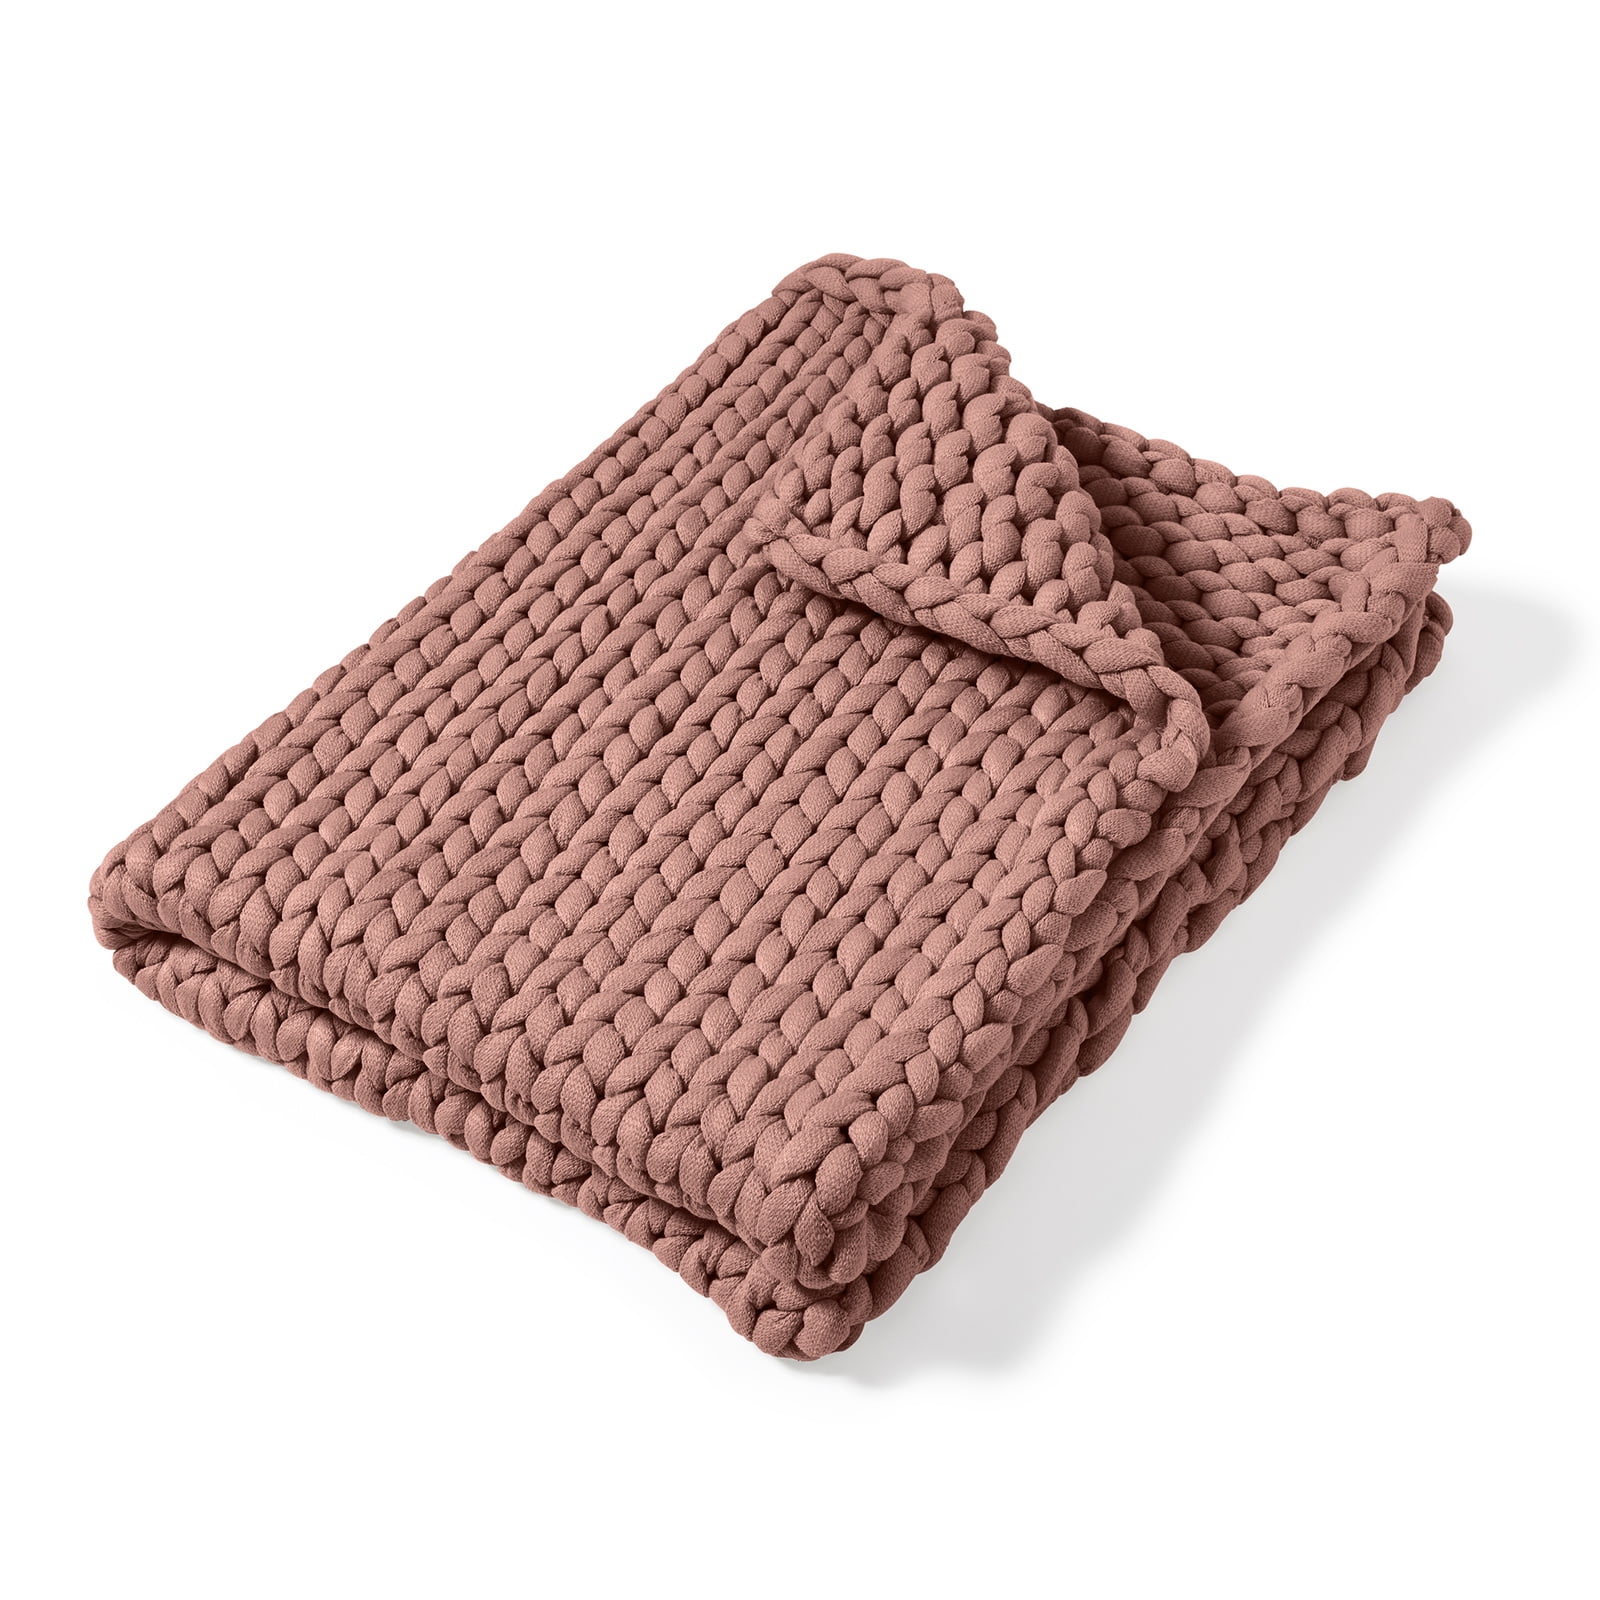 Picture of American Heritage Textiles 70012 40 x 50 in. Chunky Knit Throw, Mauve